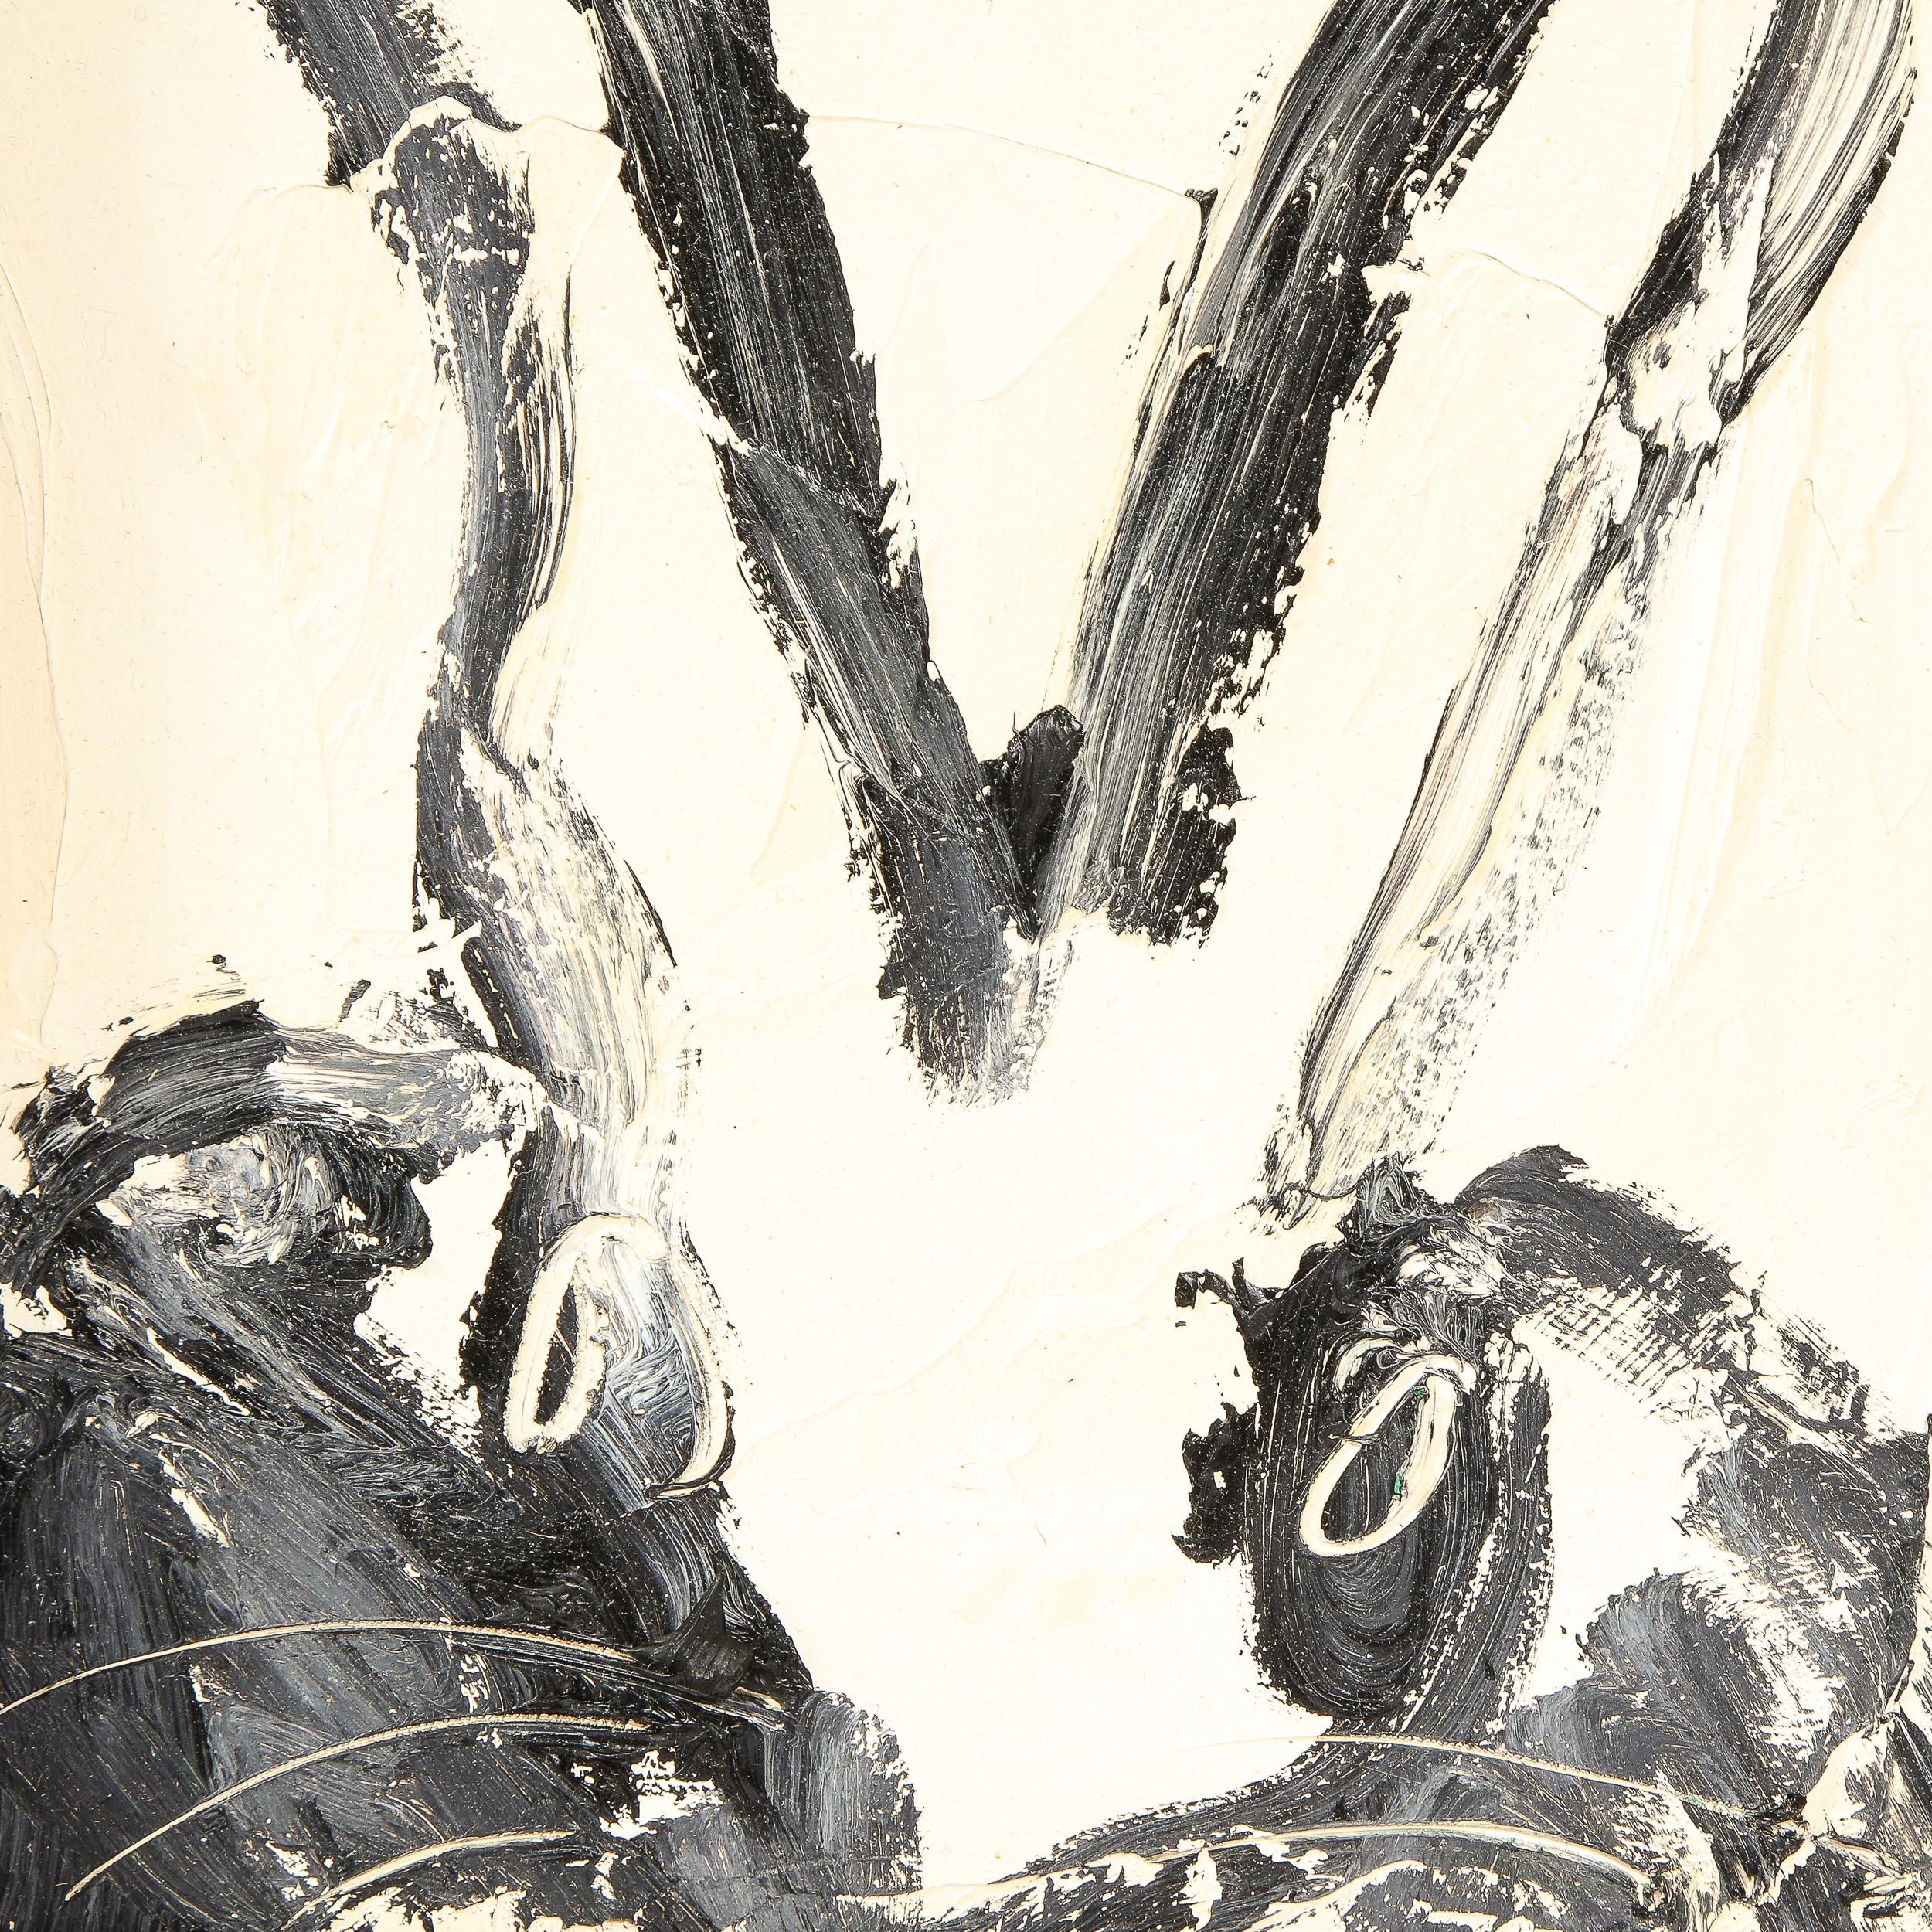 This whimsical and sophisticated painting was realized by the esteemed contemporary painter, Hunt Slonem in 2015. It presents a stylized rabbit in profile, rendered with loose and expressive brush strokes in black and white paint. Bold, graphic and